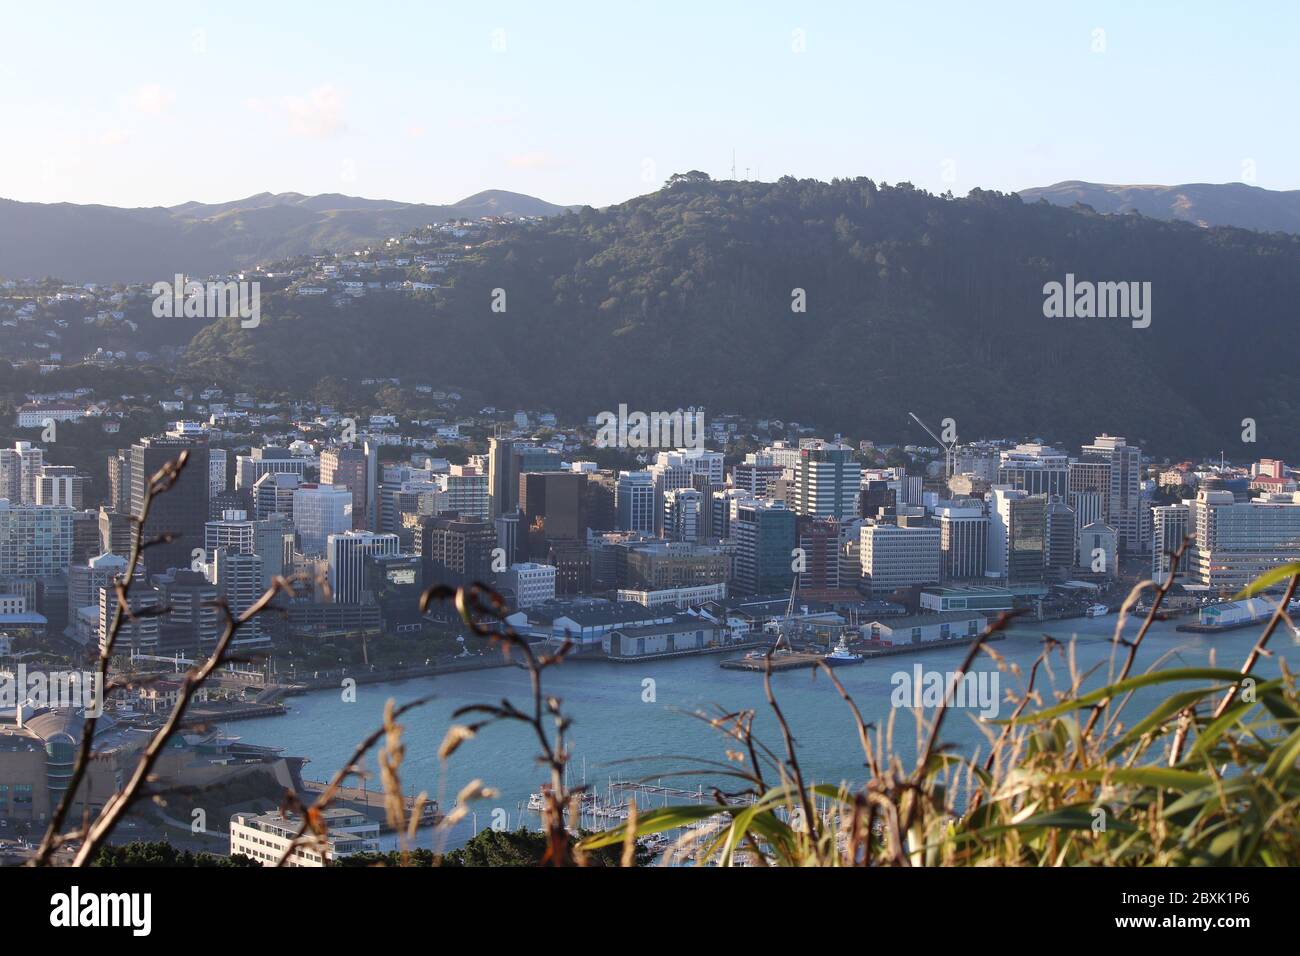 Great Panorama of Wellington City Center and Port with buildings, ships, the ocean and surrounded by a forested mountain. Photo taken from Mt Victoria. Stock Photo